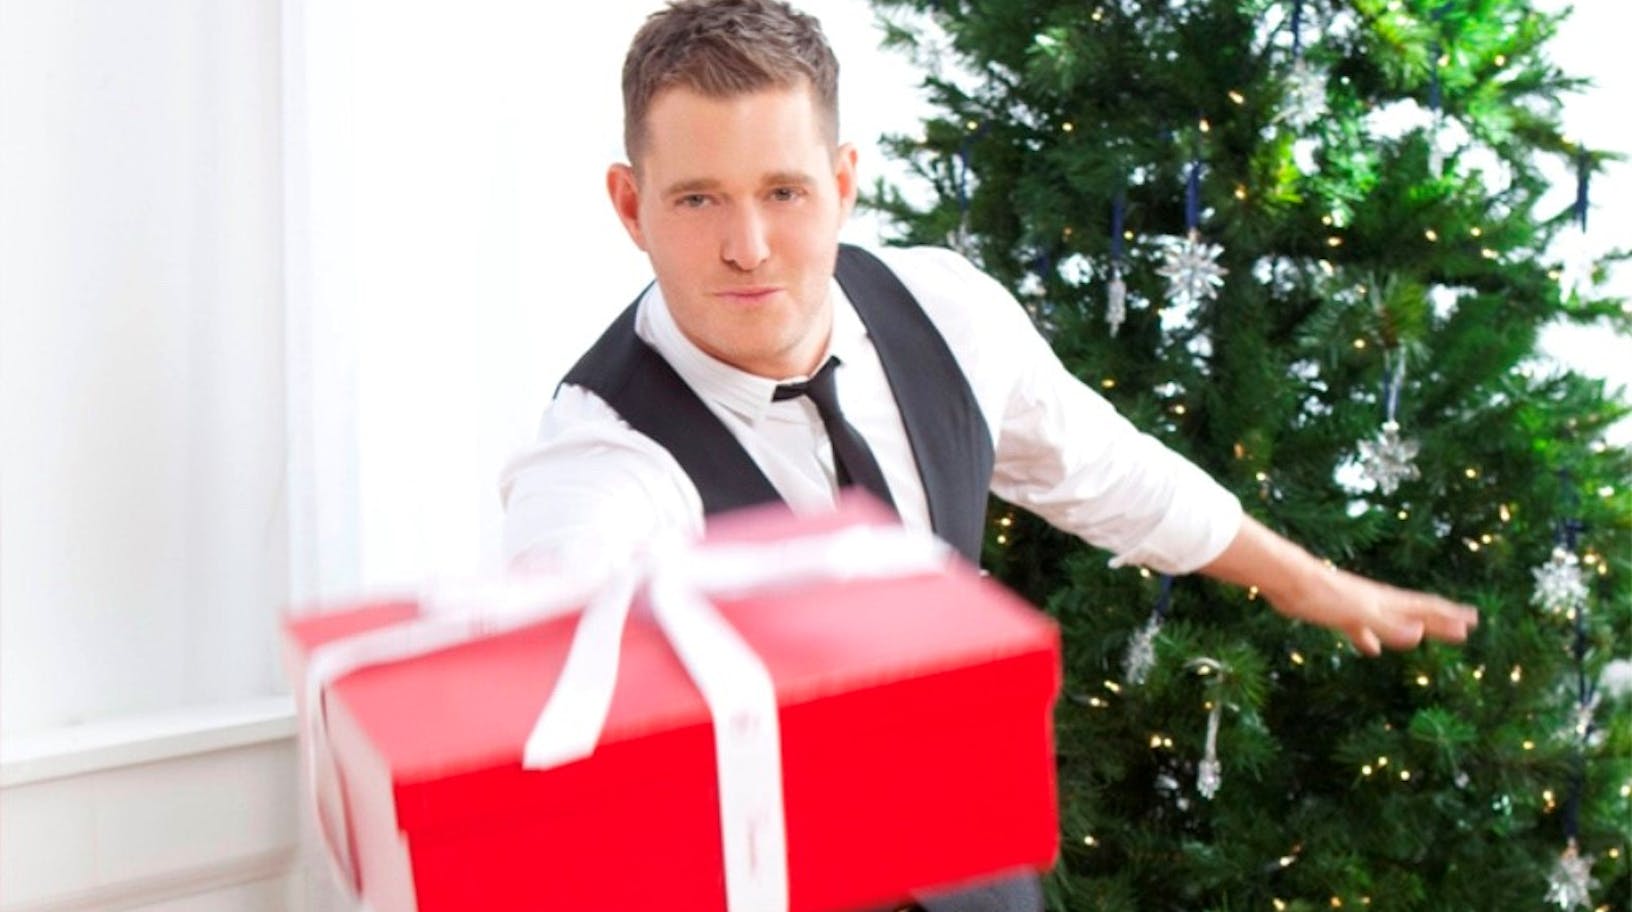 Michael Bublé leads the Christmas Albums Chart - ARIA